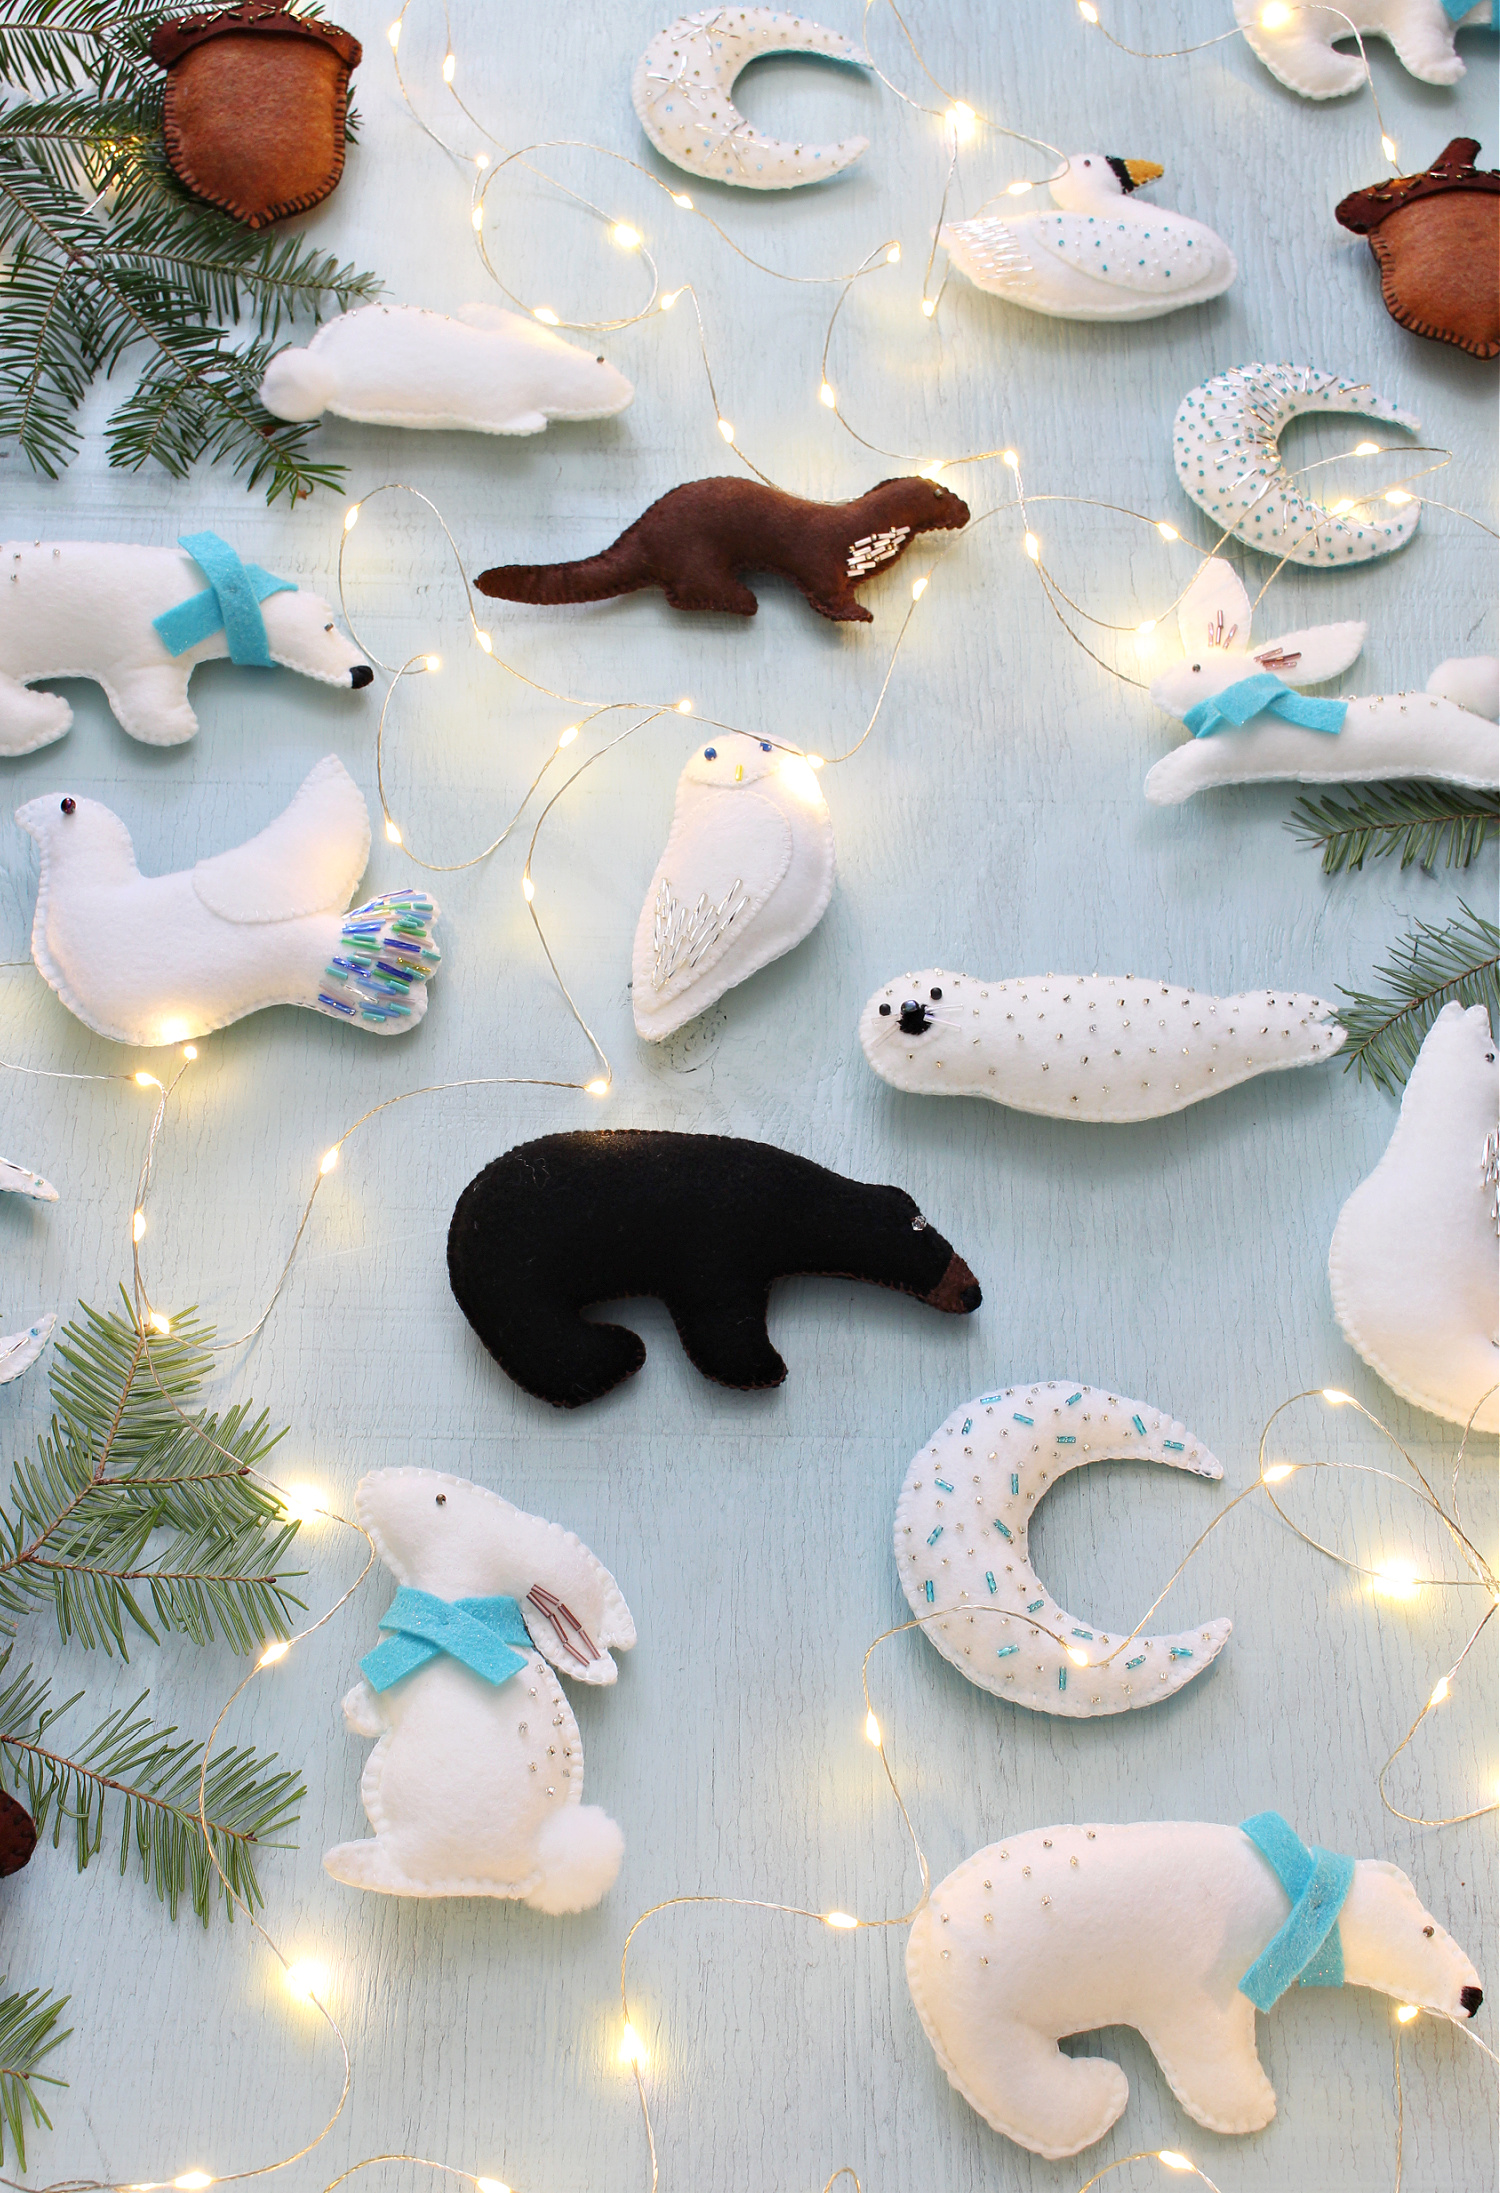 What Can I Make with Felt for Christmas?